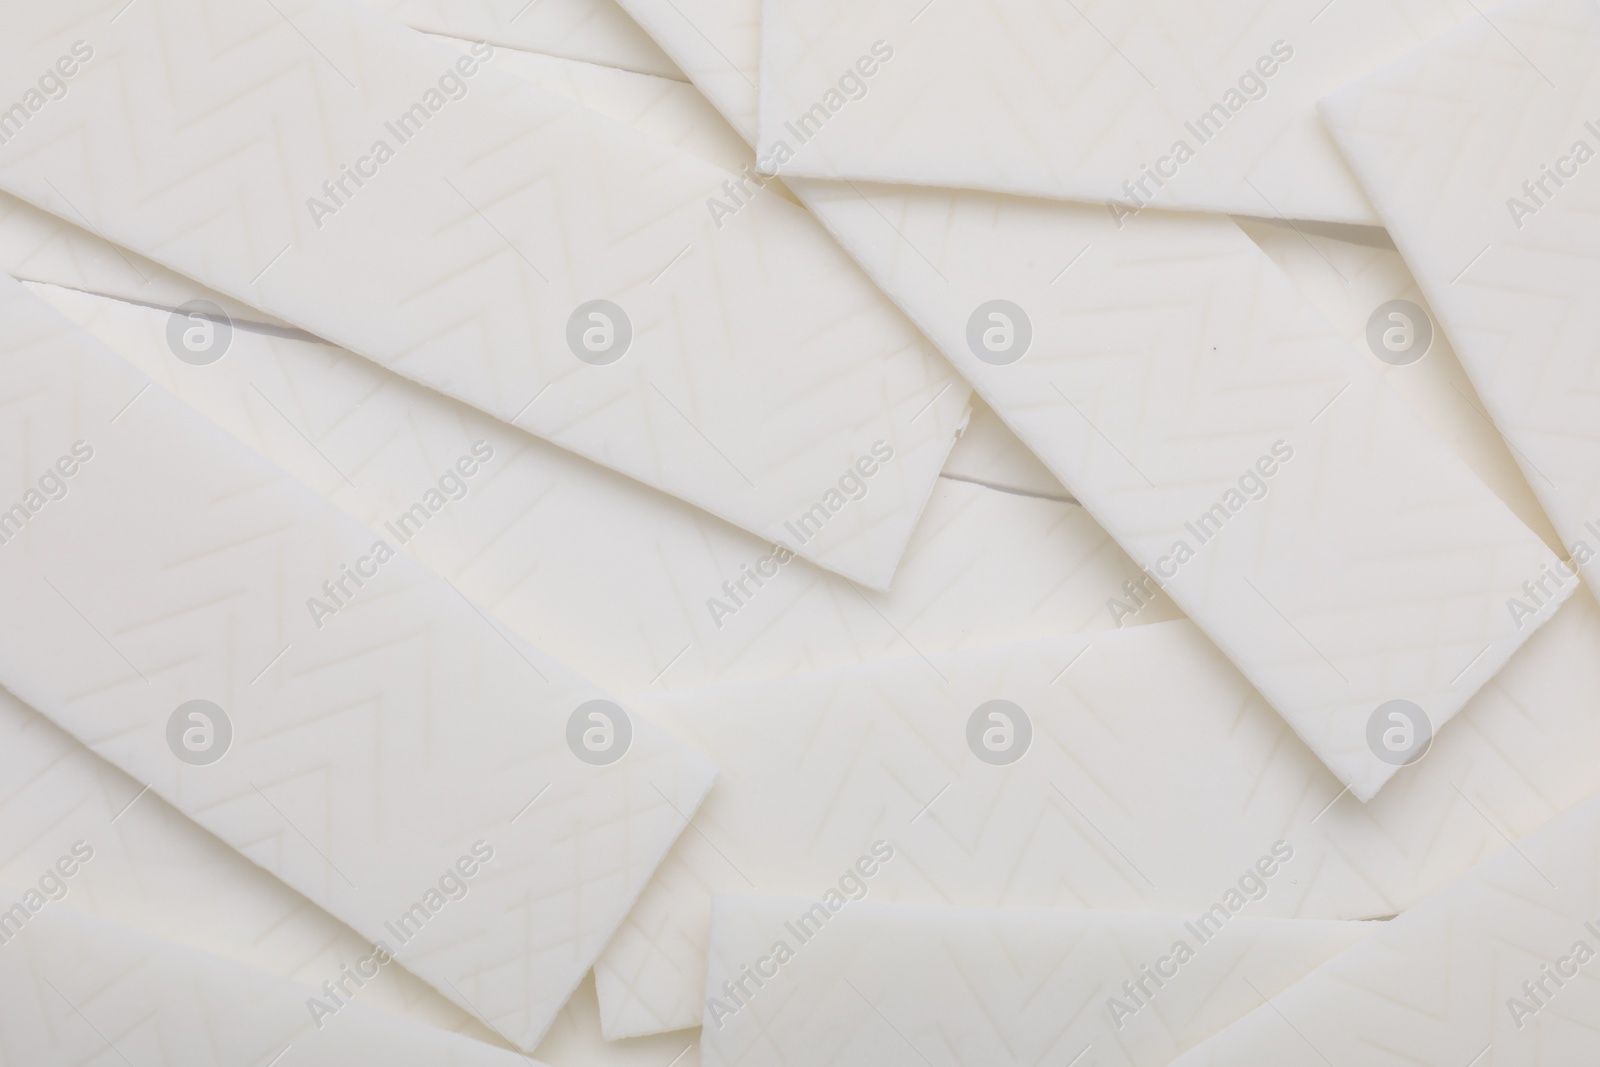 Photo of Sticks of white chewing gum as background, top view